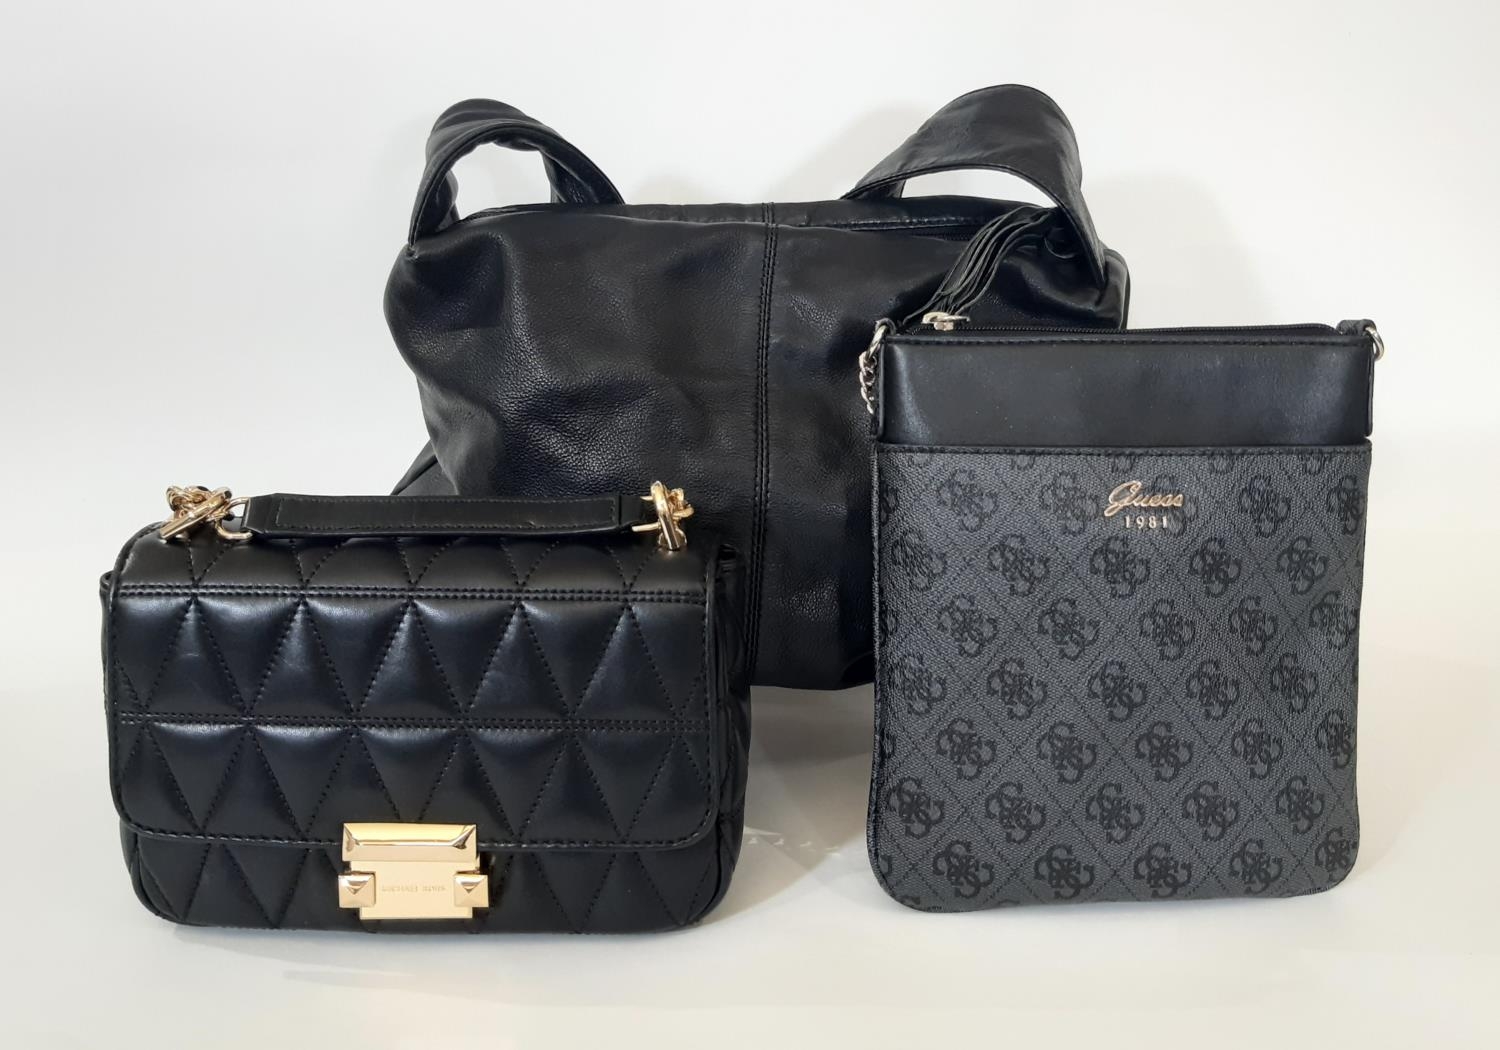 3 designer ladies hand bags comprising a small crossbody bag by Michael Kors in quilted black